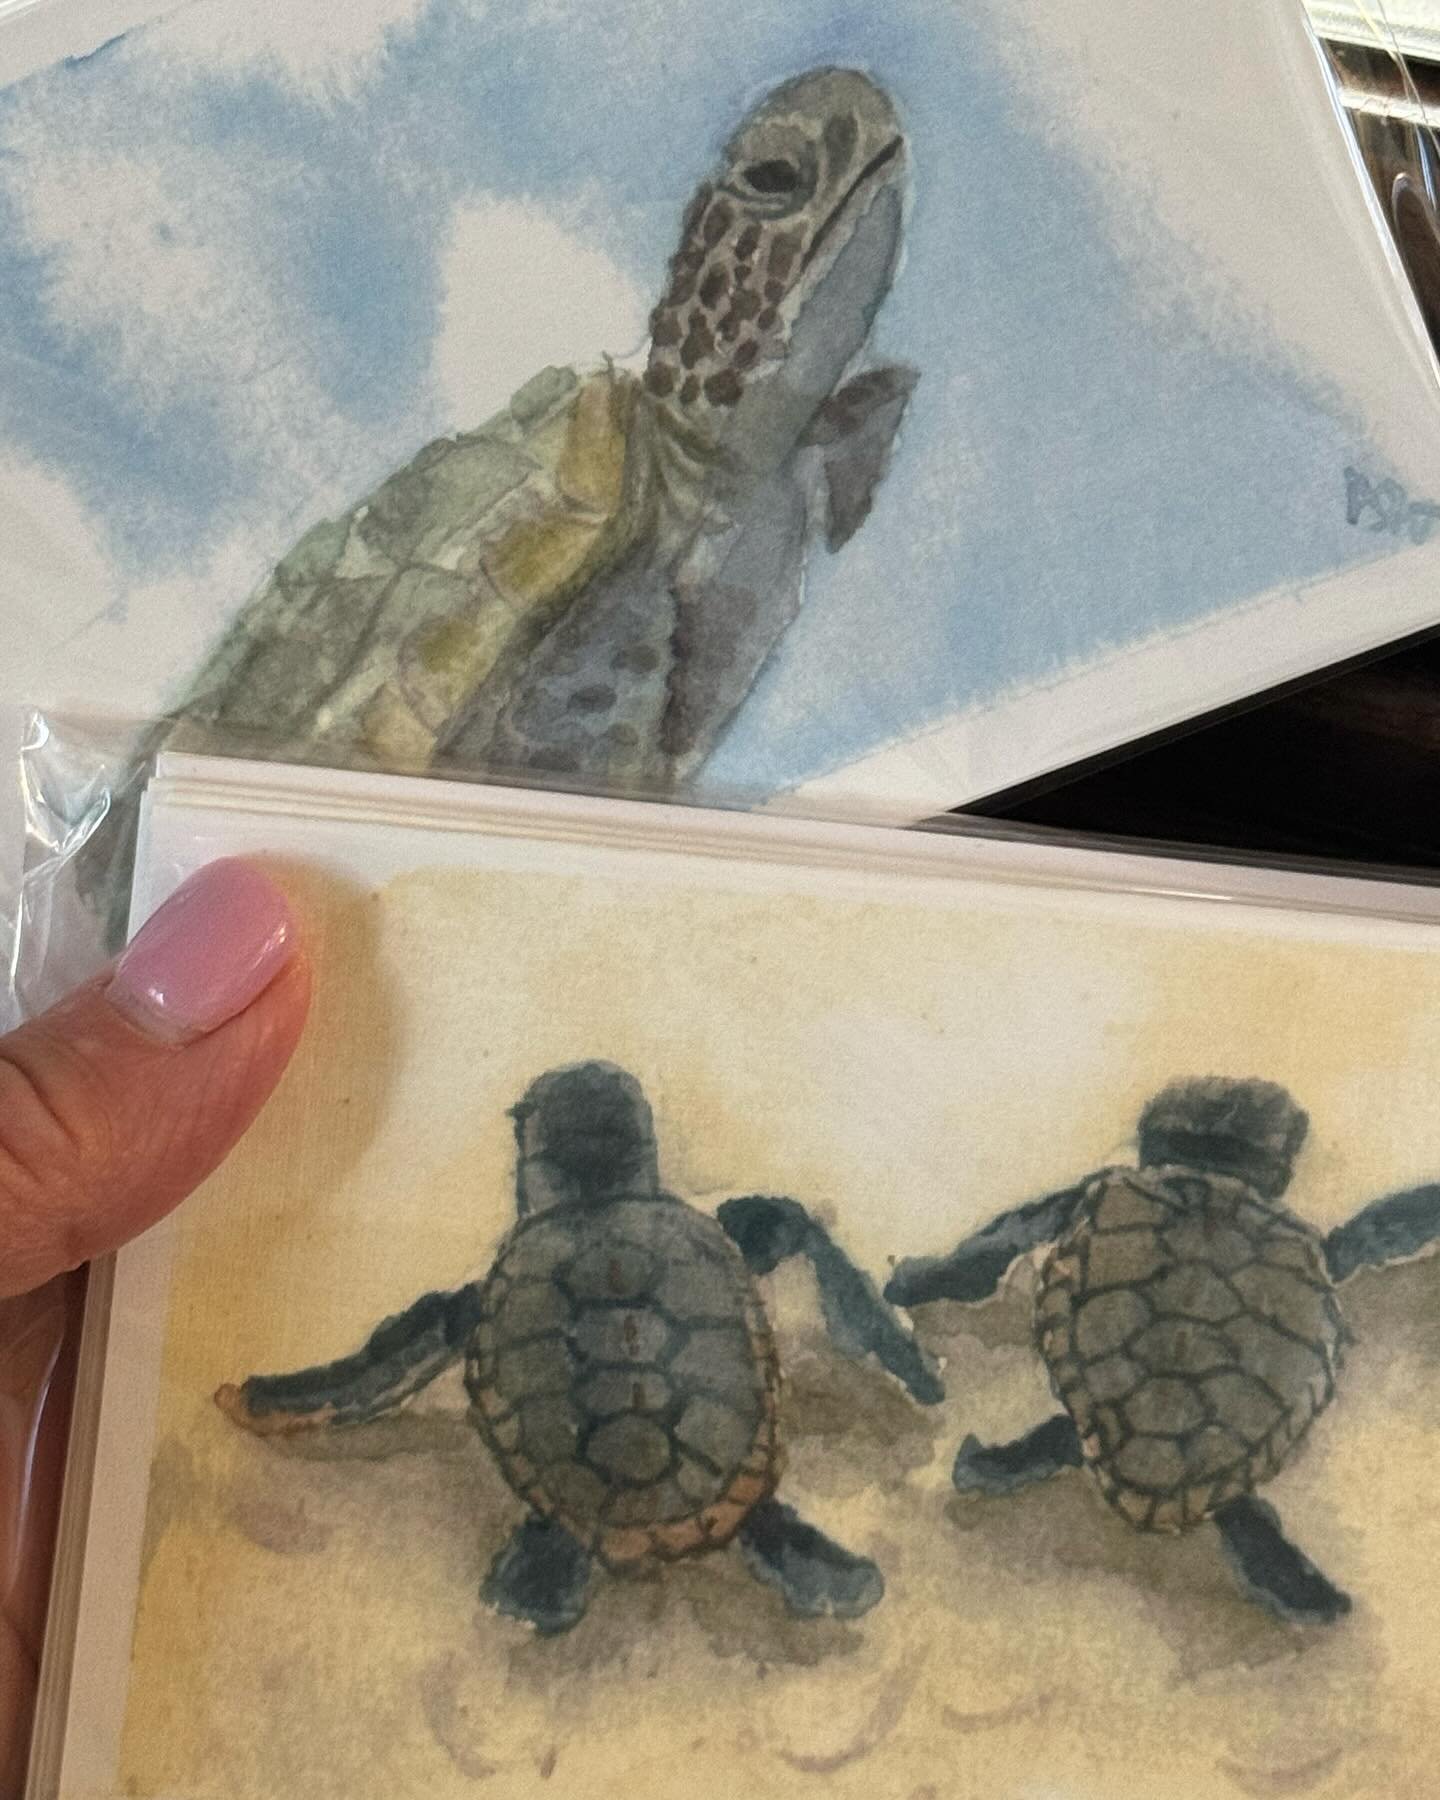 Need adorable sea turtle cards for your correspondence needs?? ✍🏻

OF COURSE YOU DO! 👏🏻👏🏻👏🏻

Reach out to my friend, Anita, at @dandelionlanding to purchase. 🫶🏻 These are sold in packs of 4, each card featuring a different watercolor paintin